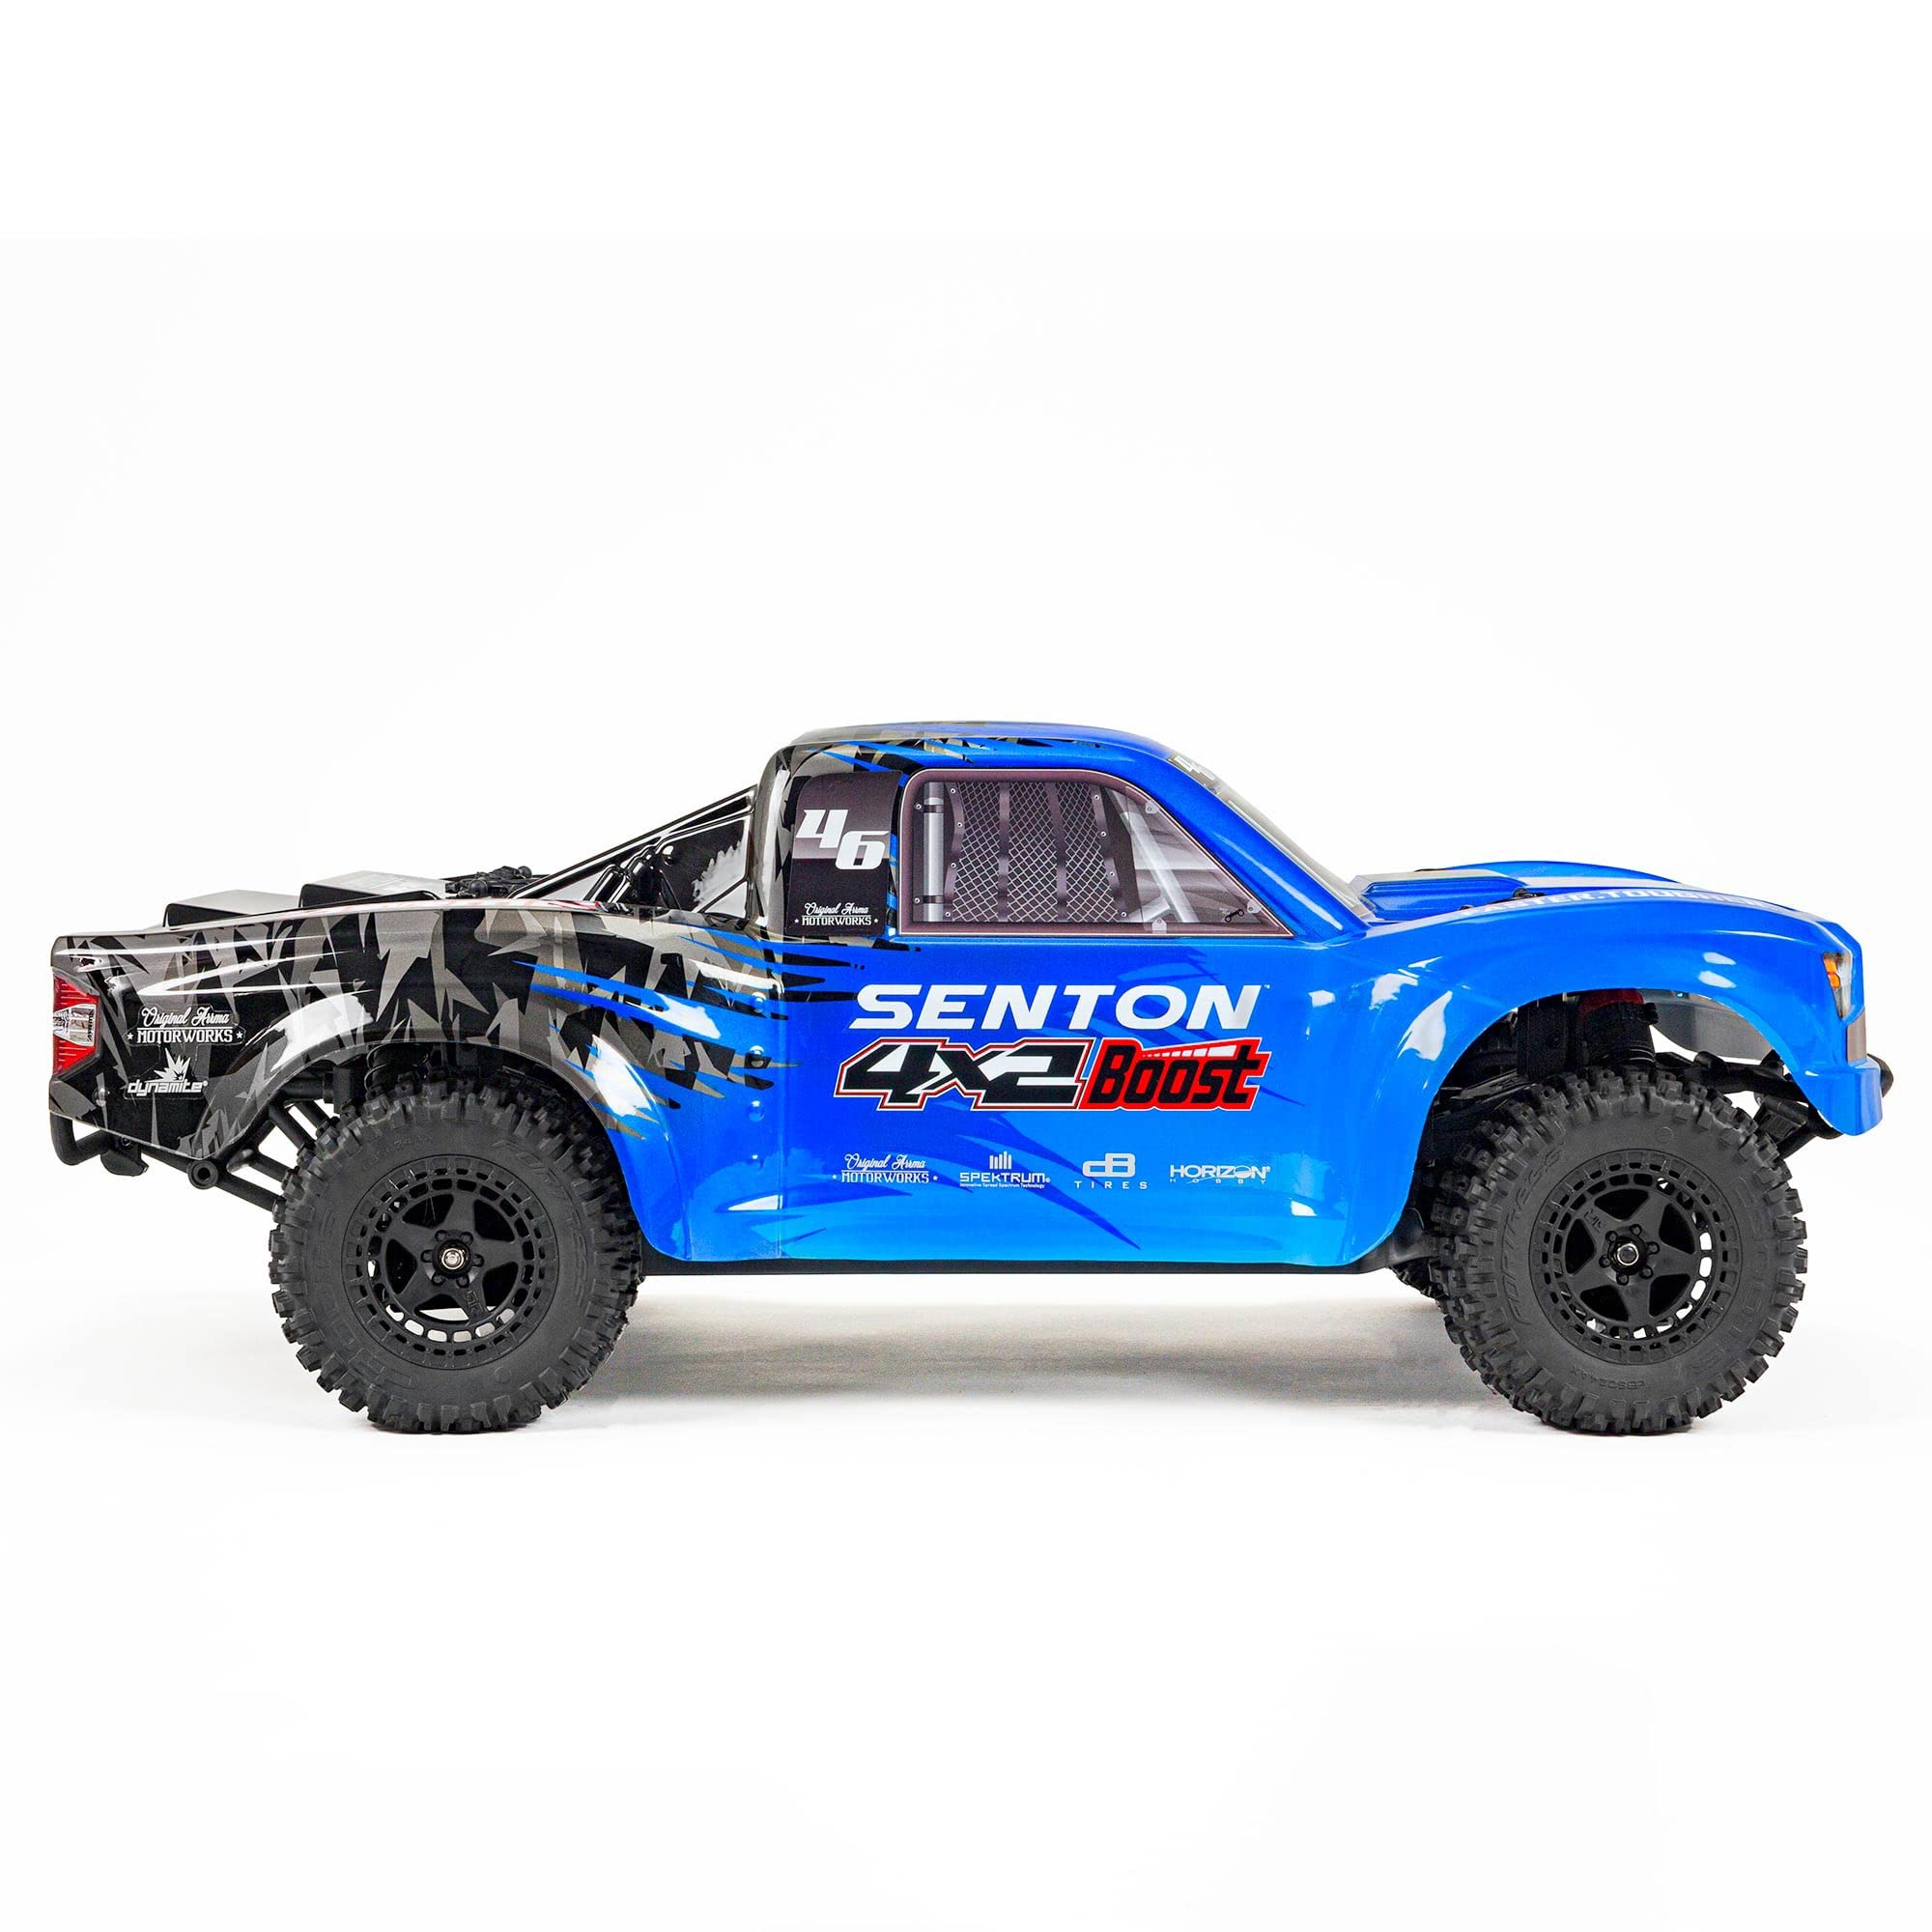 ARRMA RC Truck 1/10 SENTON 4X2 Boost MEGA 550 Brushed Short Course Truck RTR (Batteries and Charger Not Included), Blue, ARA4103V4T2